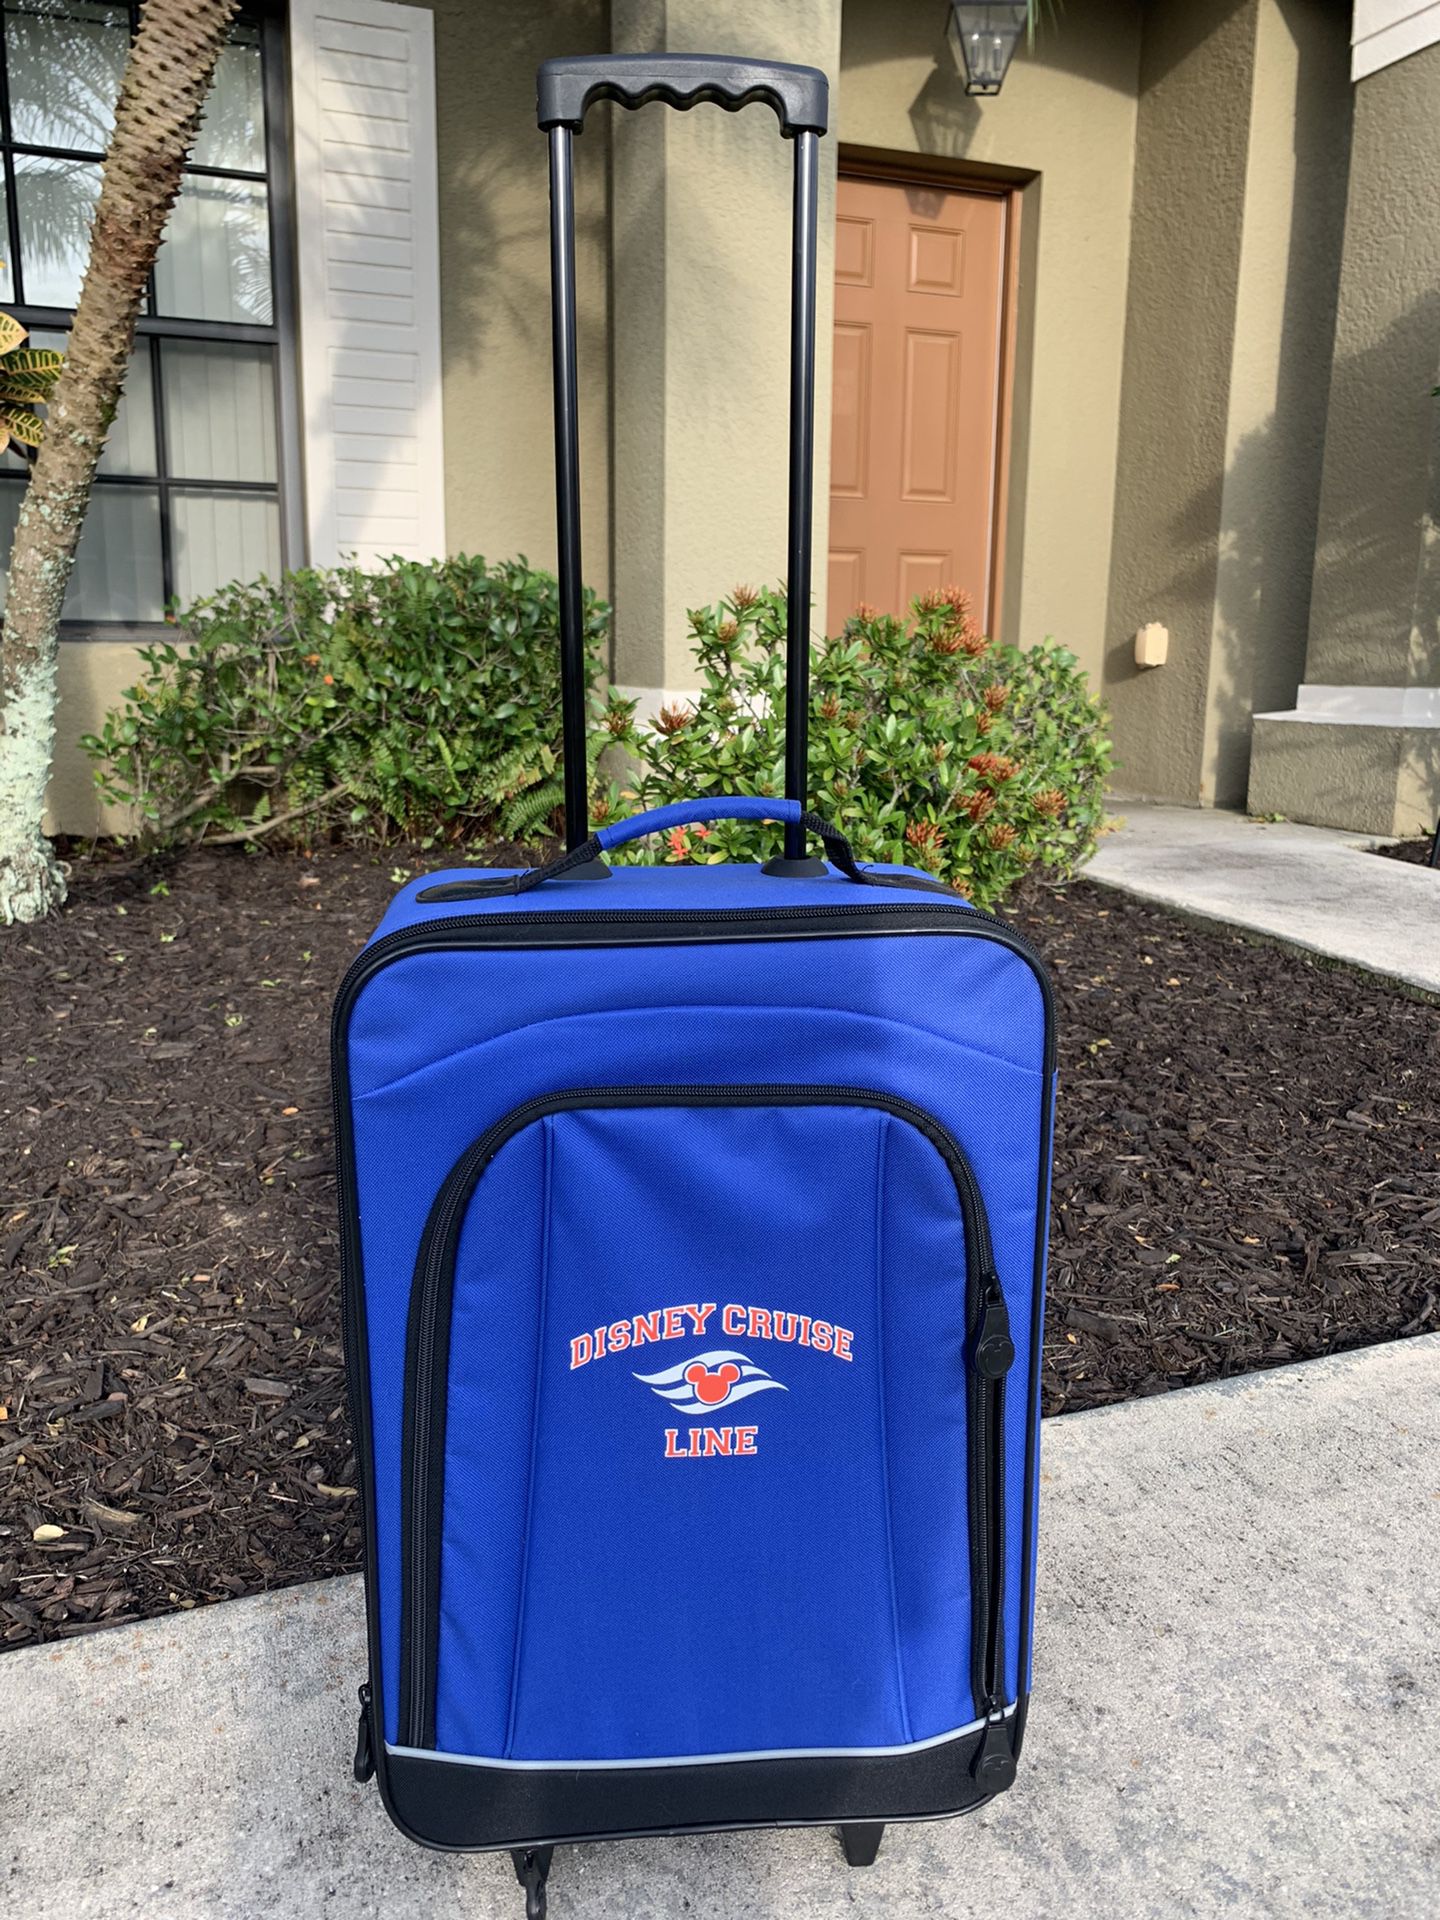 Like New Official Disney Cruise Line Luggage